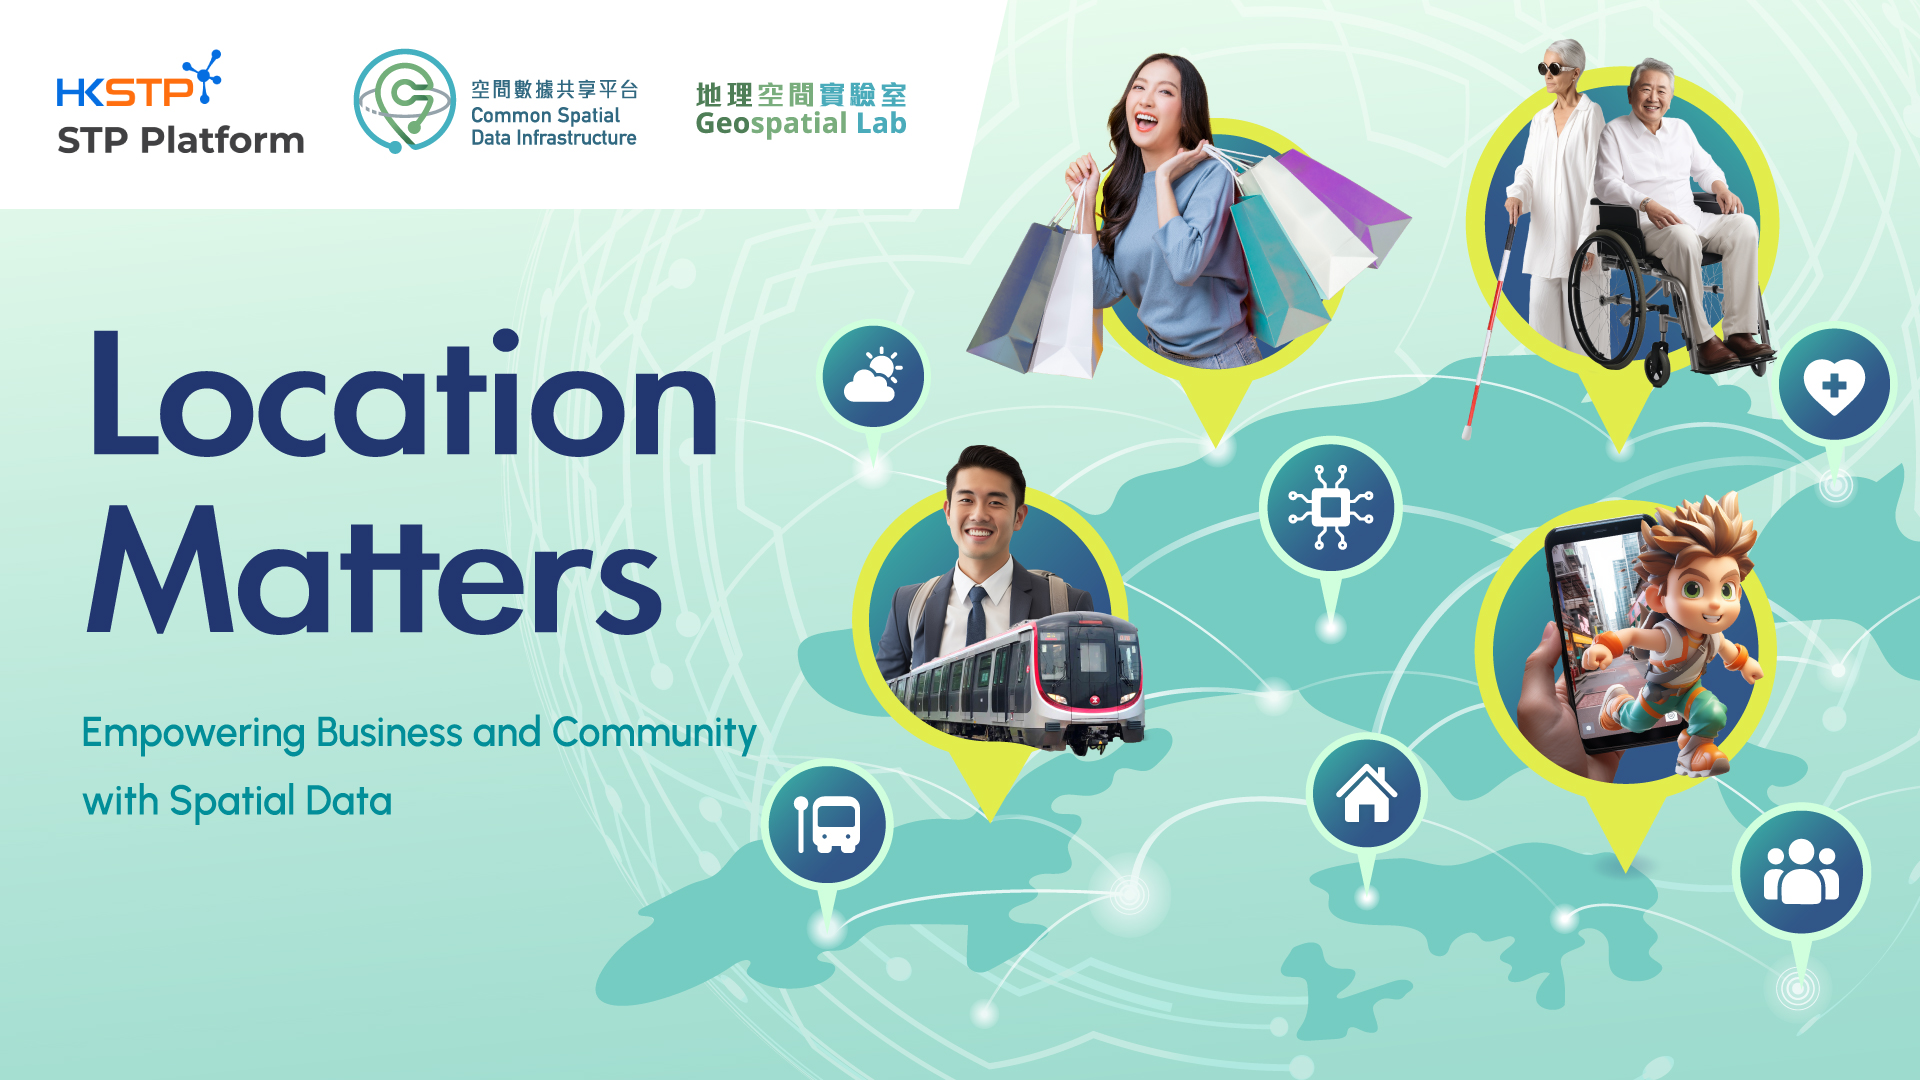 Location Matters: Empowering Business and Community with Spatial Data 海报